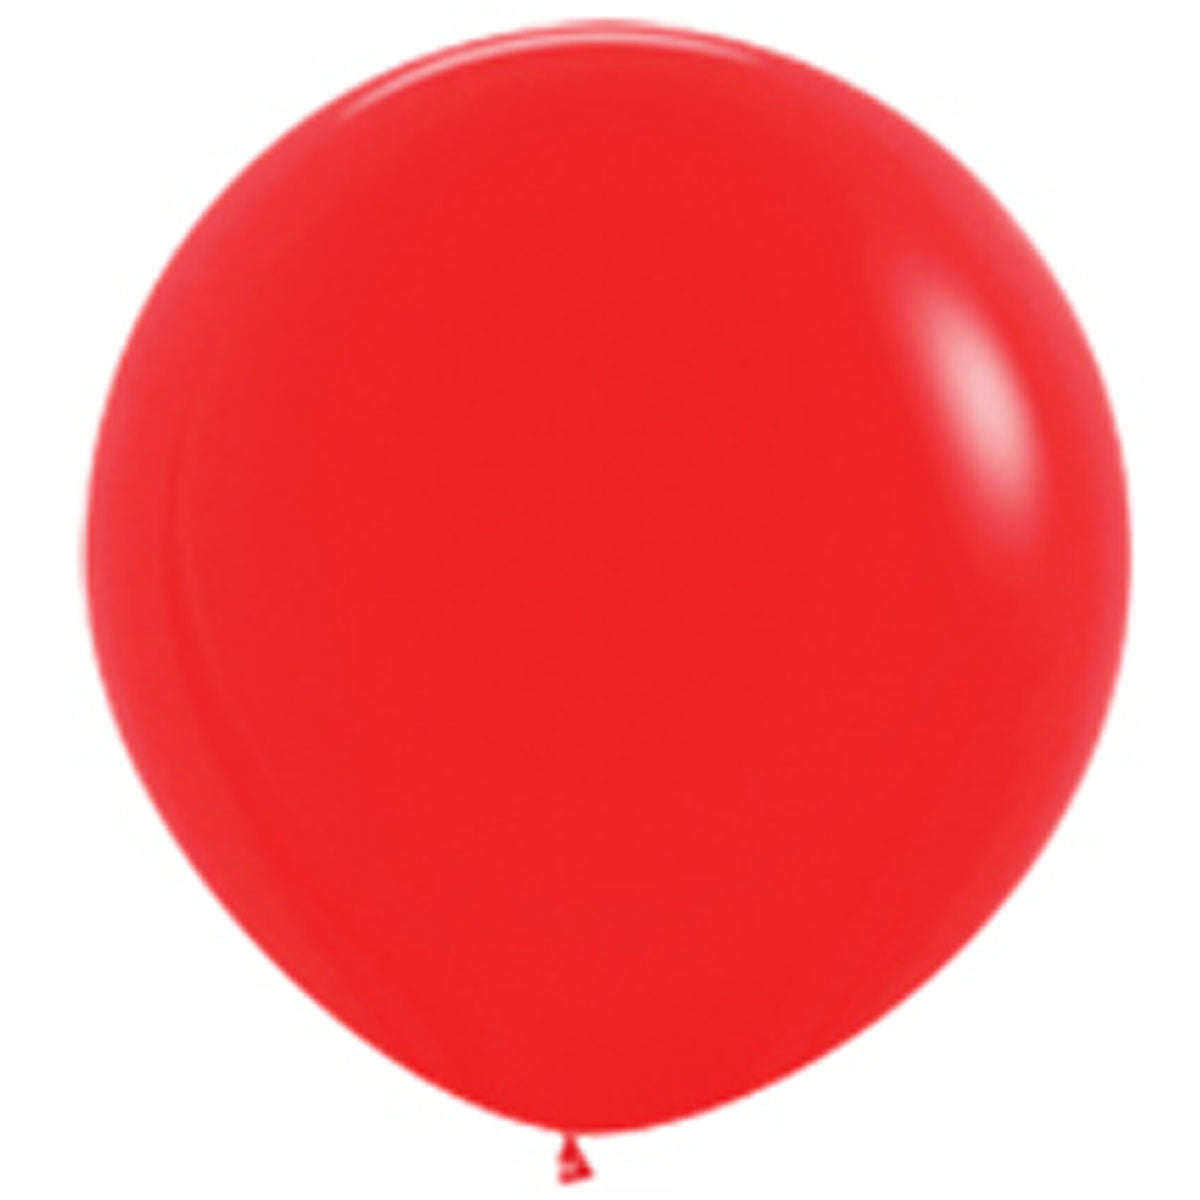 Wrapables 18 Inch Latex Balloons (10 Pack)